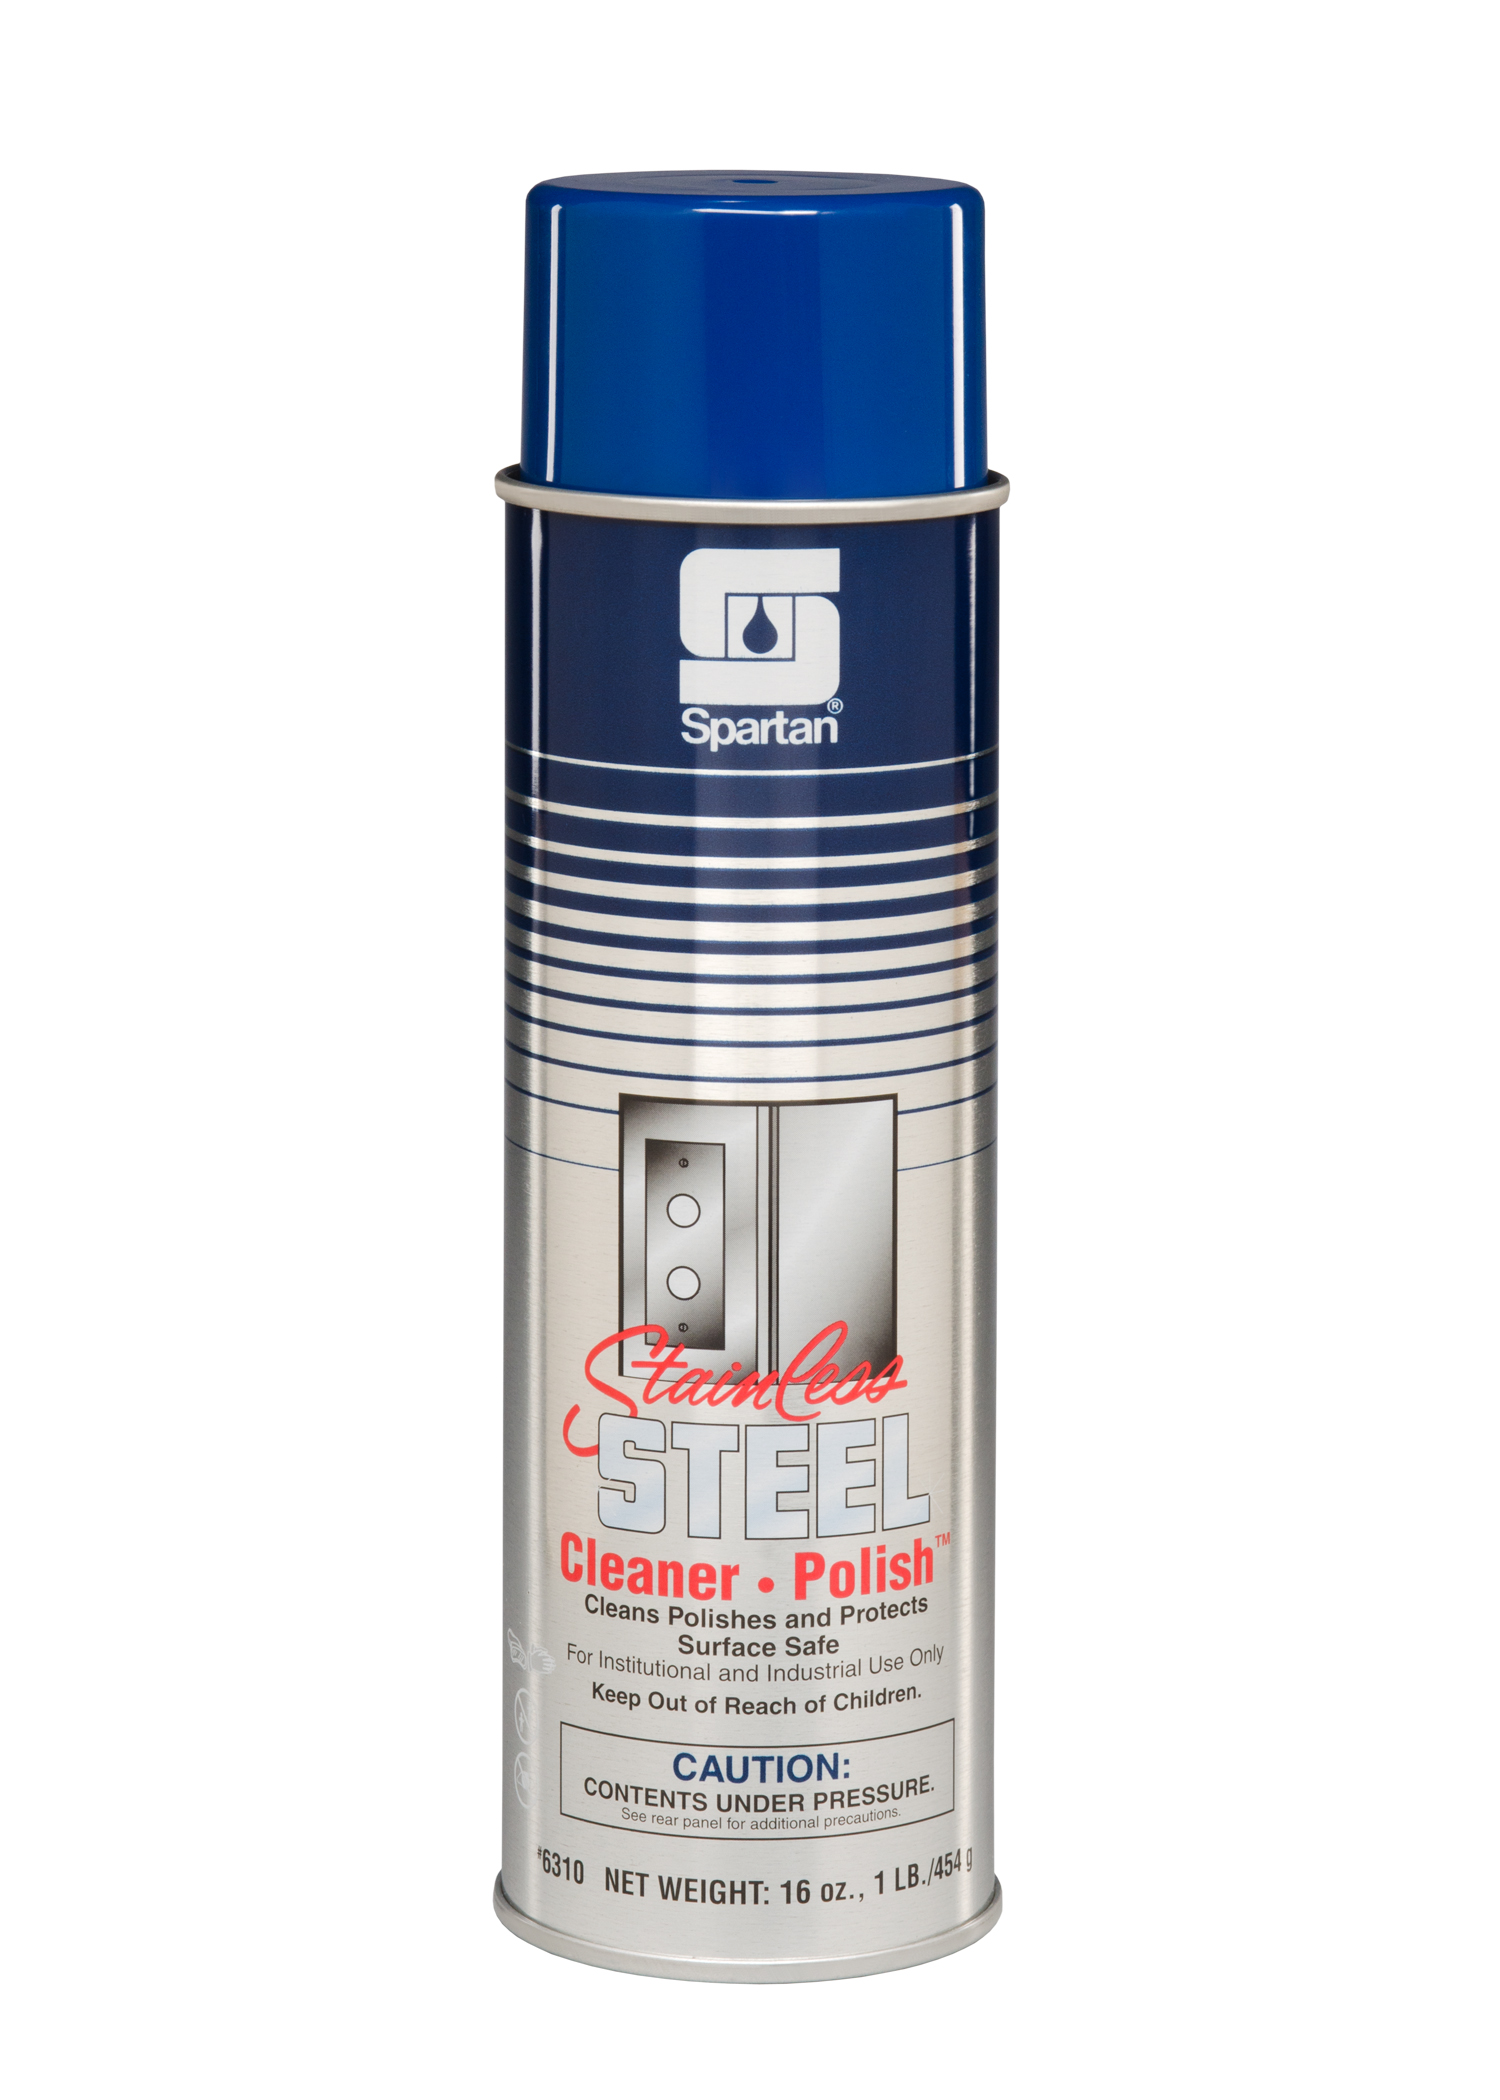 Stainless Steel Cleaner - Polish 20 oz (12 per case)